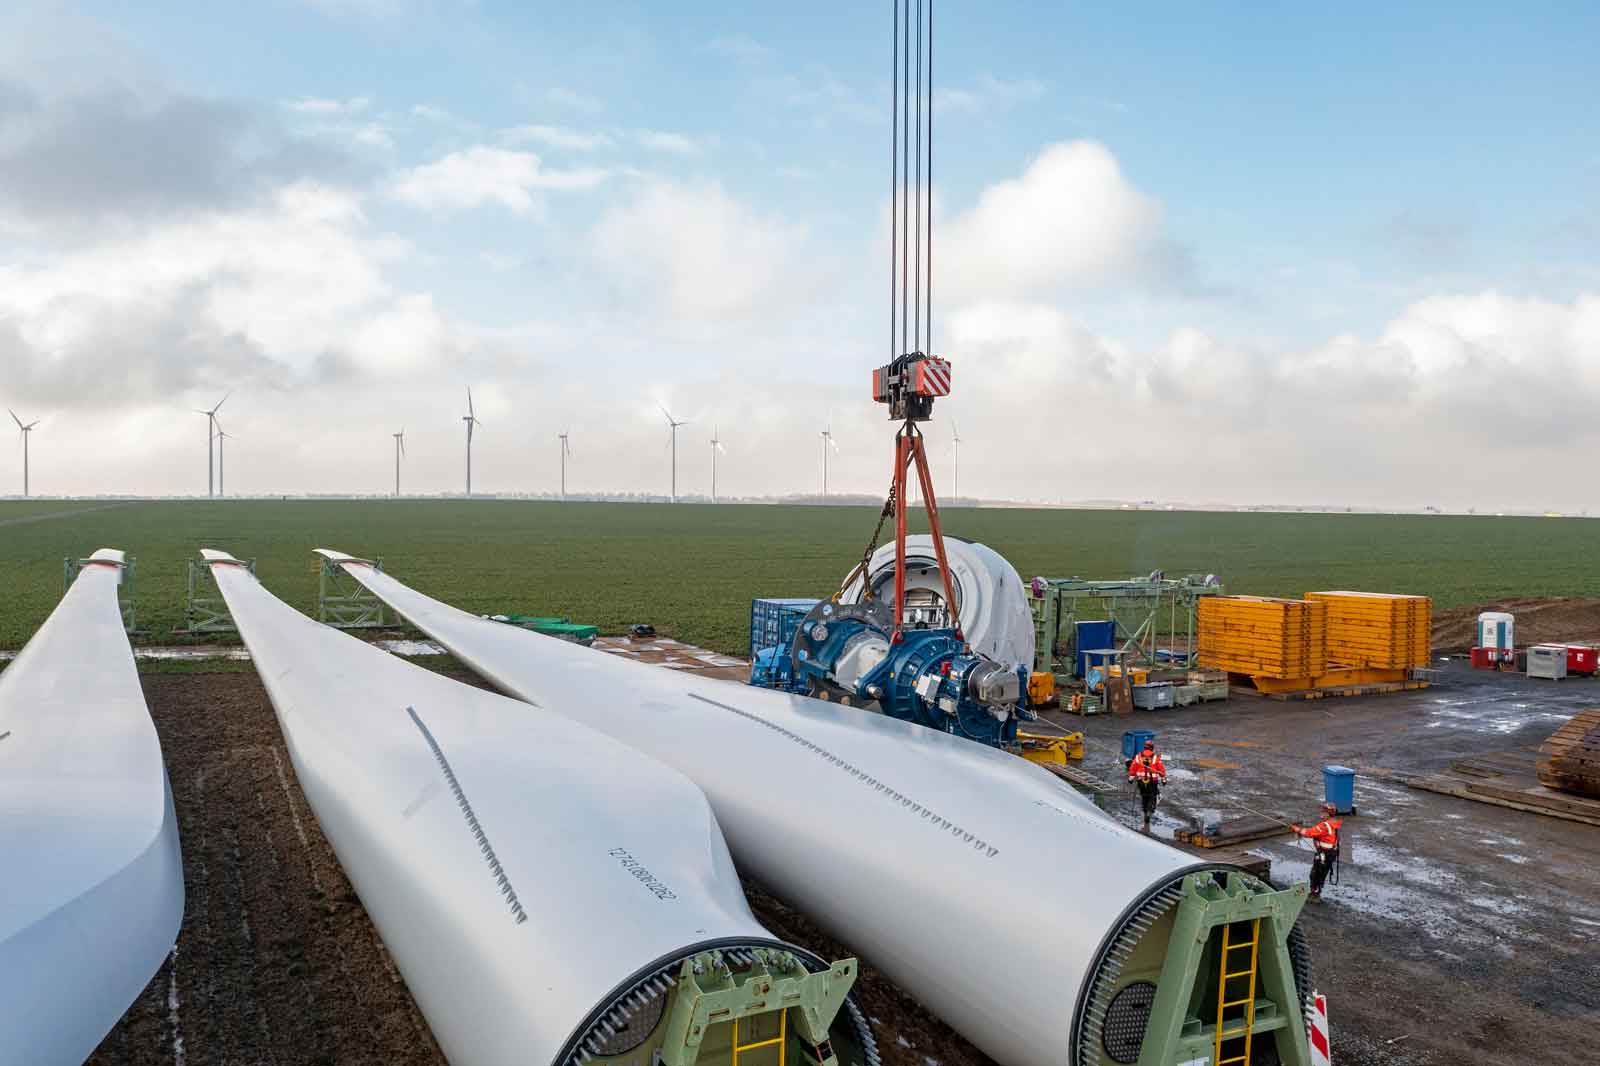 Deconstruction of a wind farm | Repowering at RWE